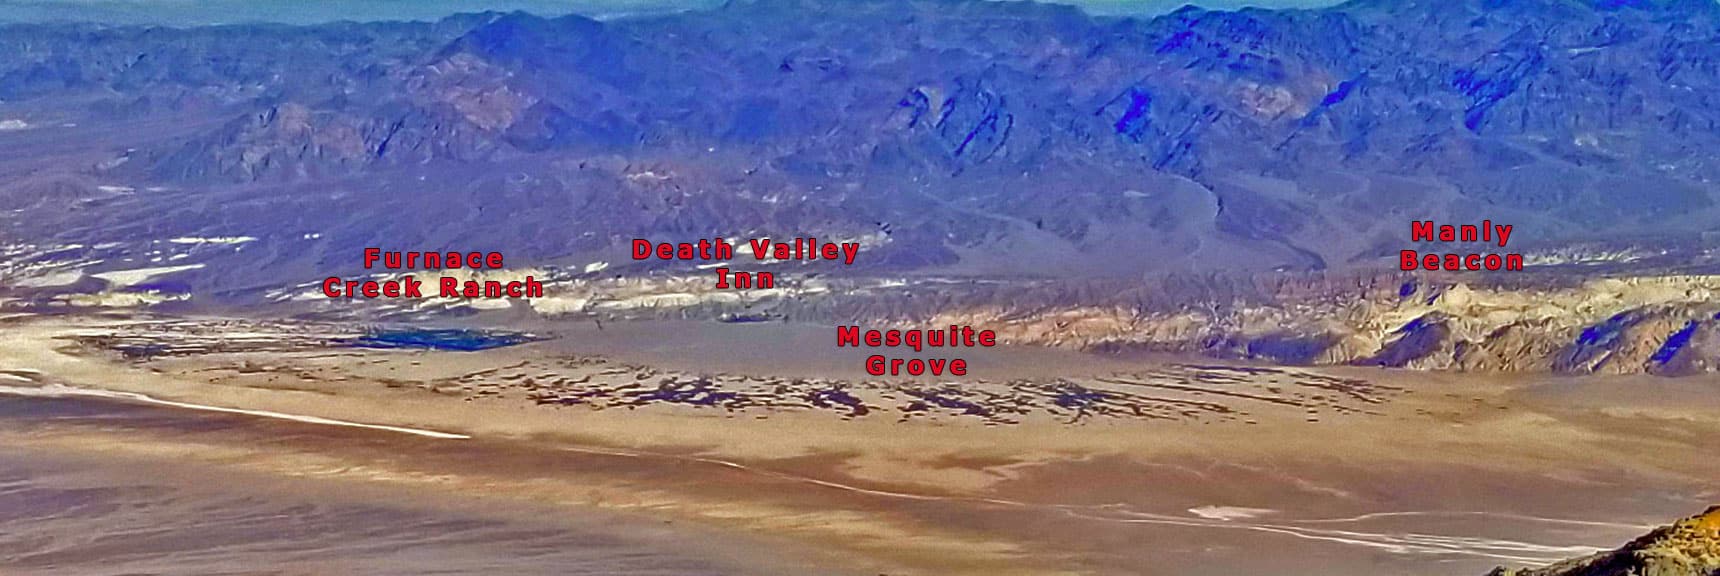 Furnace Creek Ranch, Inn at Death Valley, Mesquite Grove, Manly Beacon at Zabriskie Point | Aguereberry Point | Panamint Mountain Range | Death Valley National Park, California